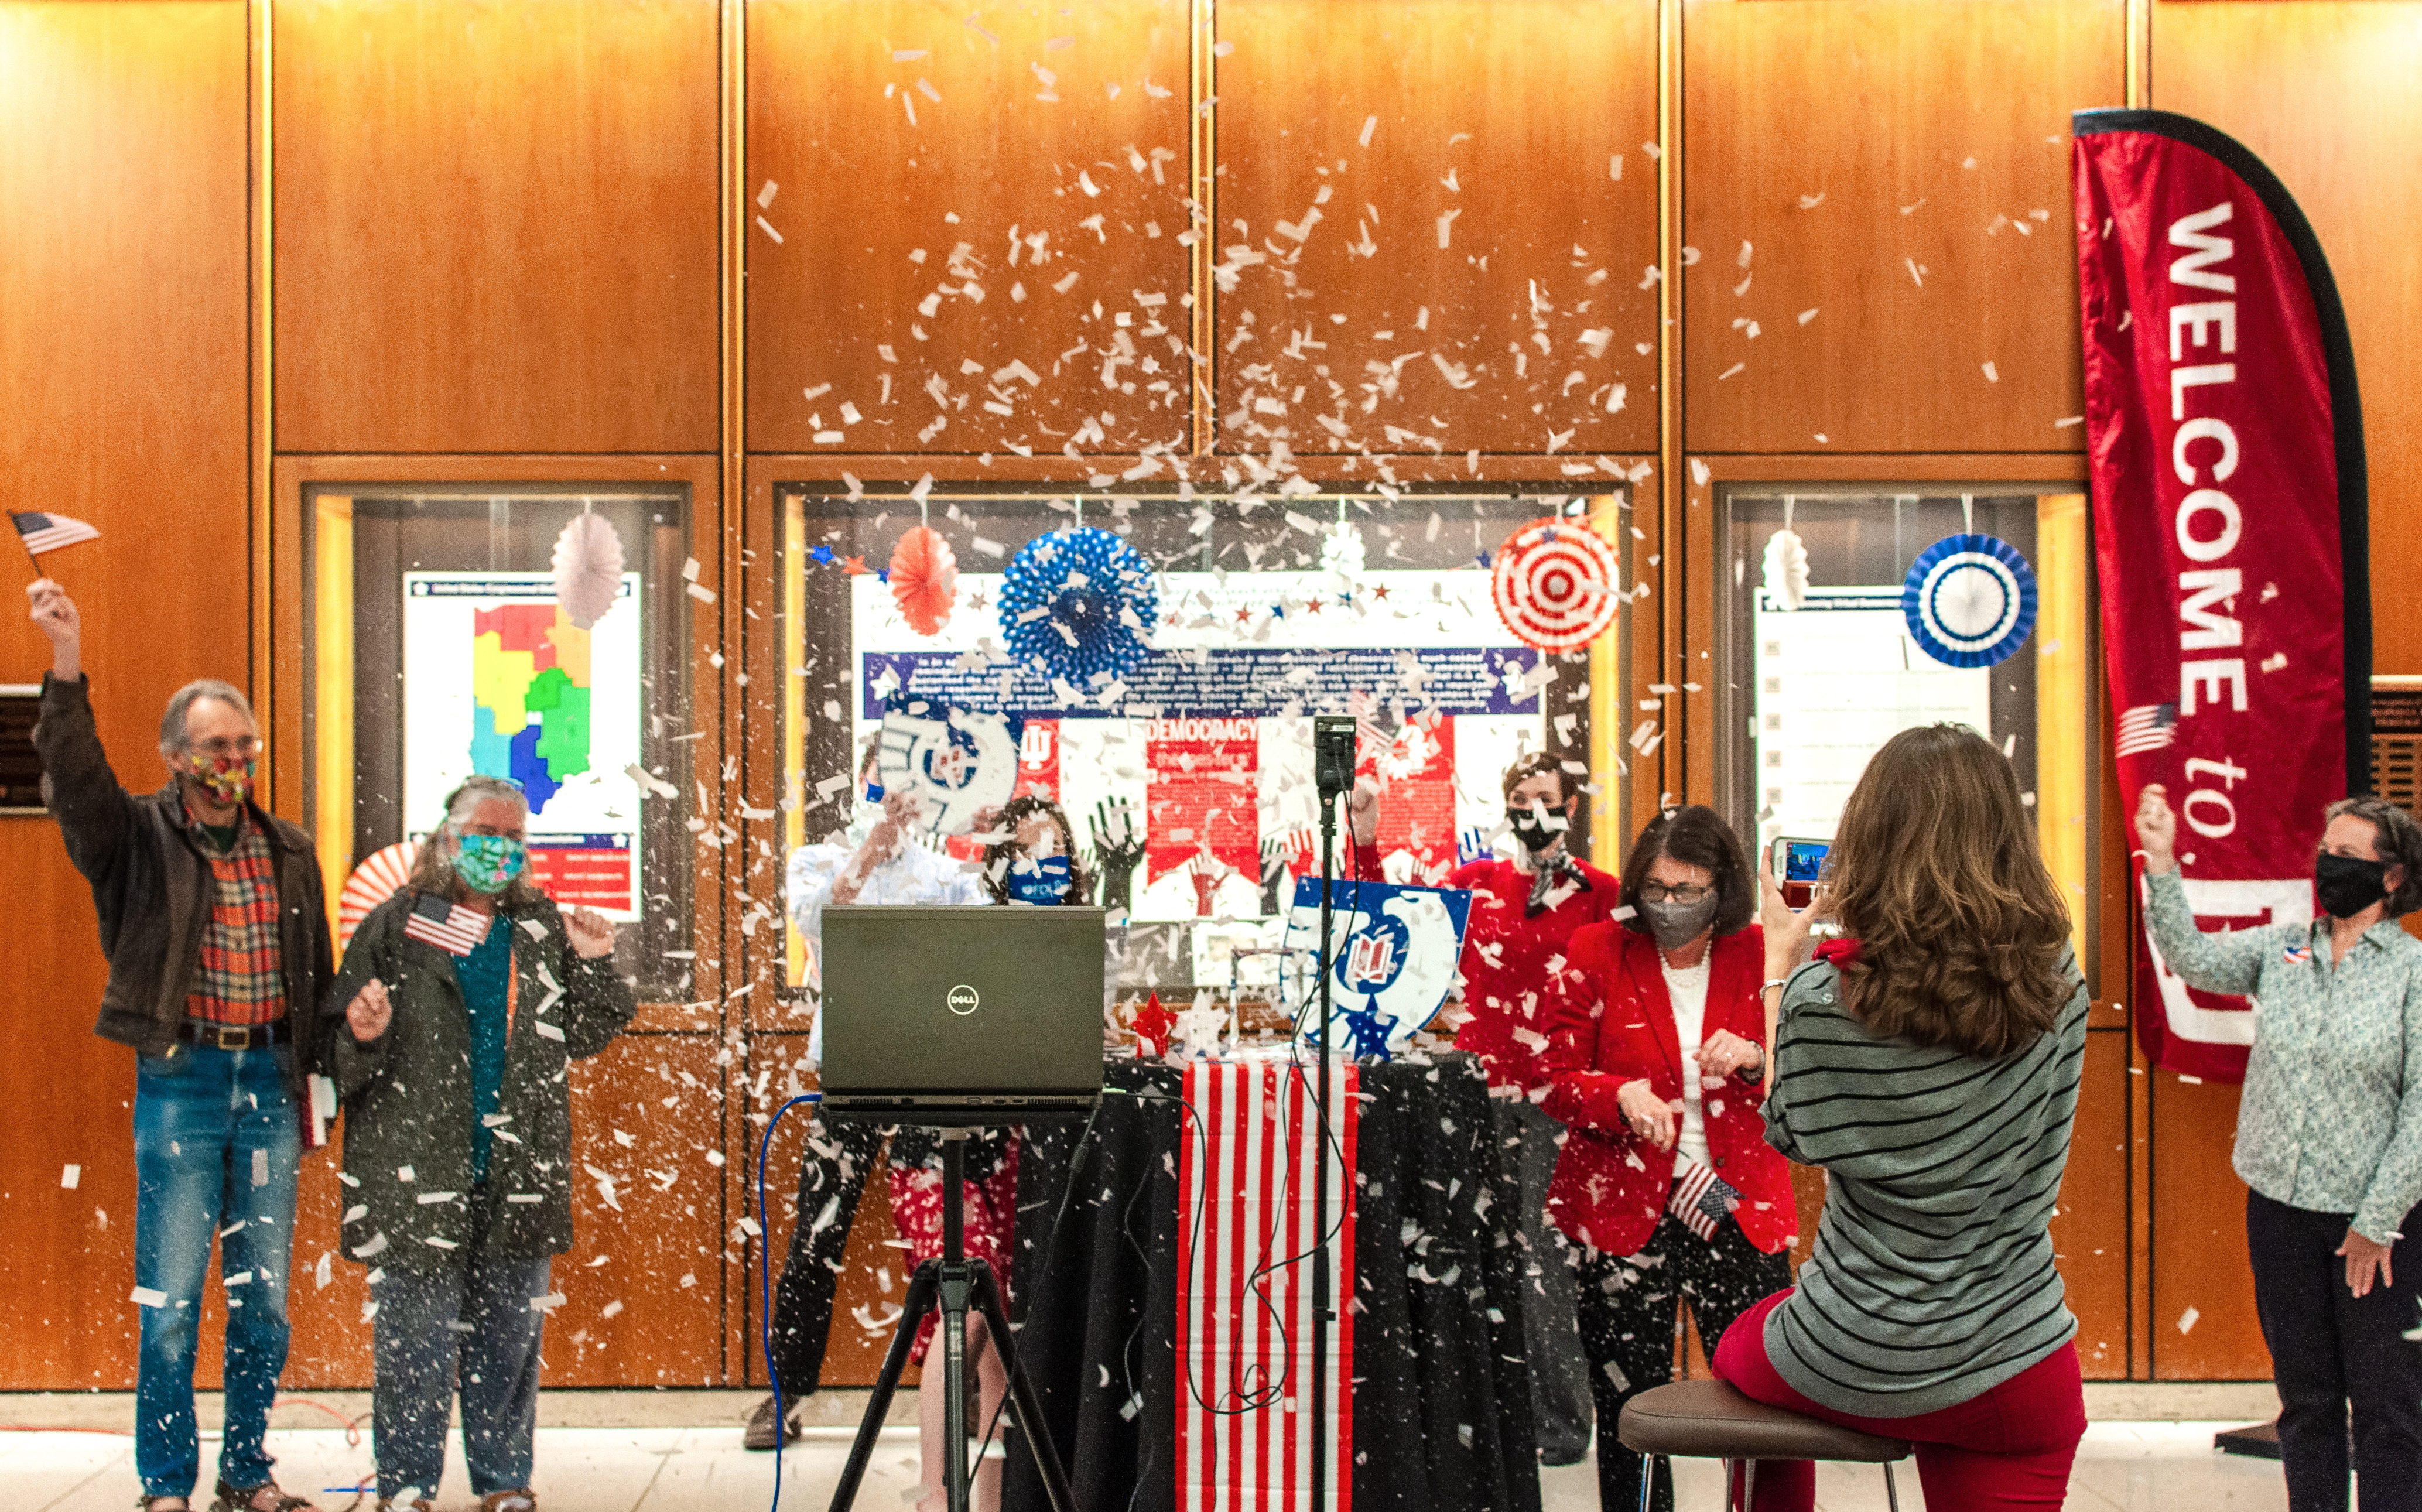 A group of people are covered in a shower of confetti as part of a library celebration happening in the Wells Library Lobby